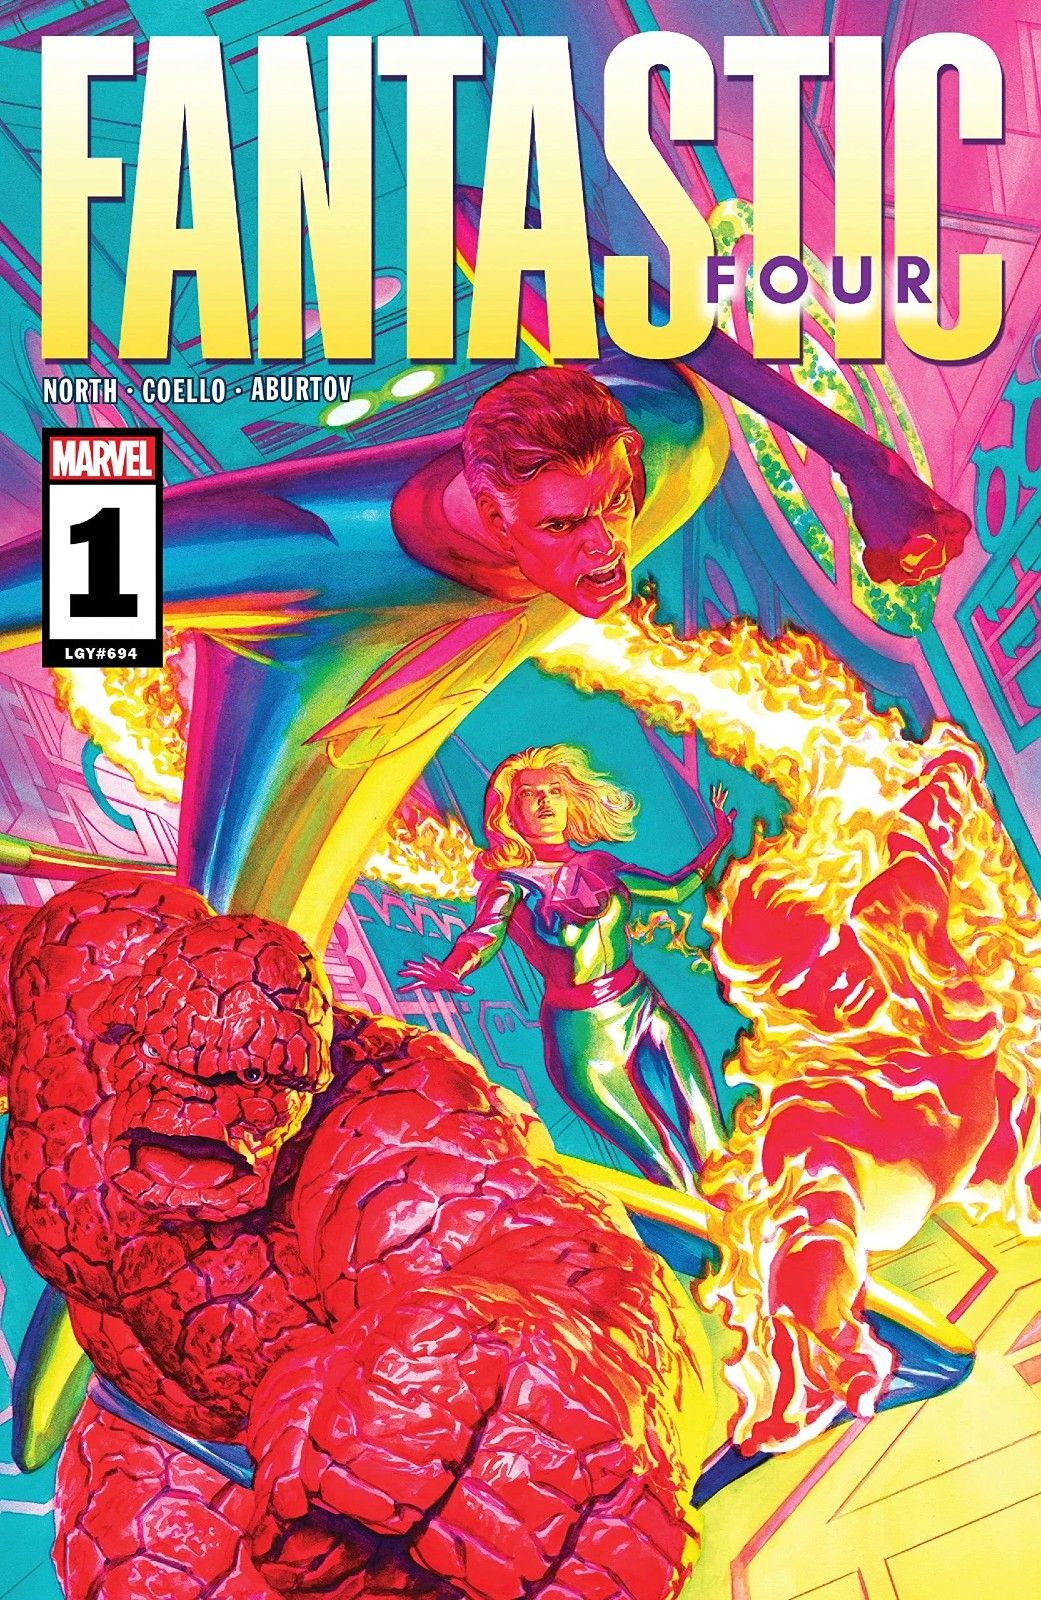 Mister Fantastic, Human Torch, Invisible Women, and The Thing go into battle in Fantastic Four (Vol. 7) #1 by Marvel